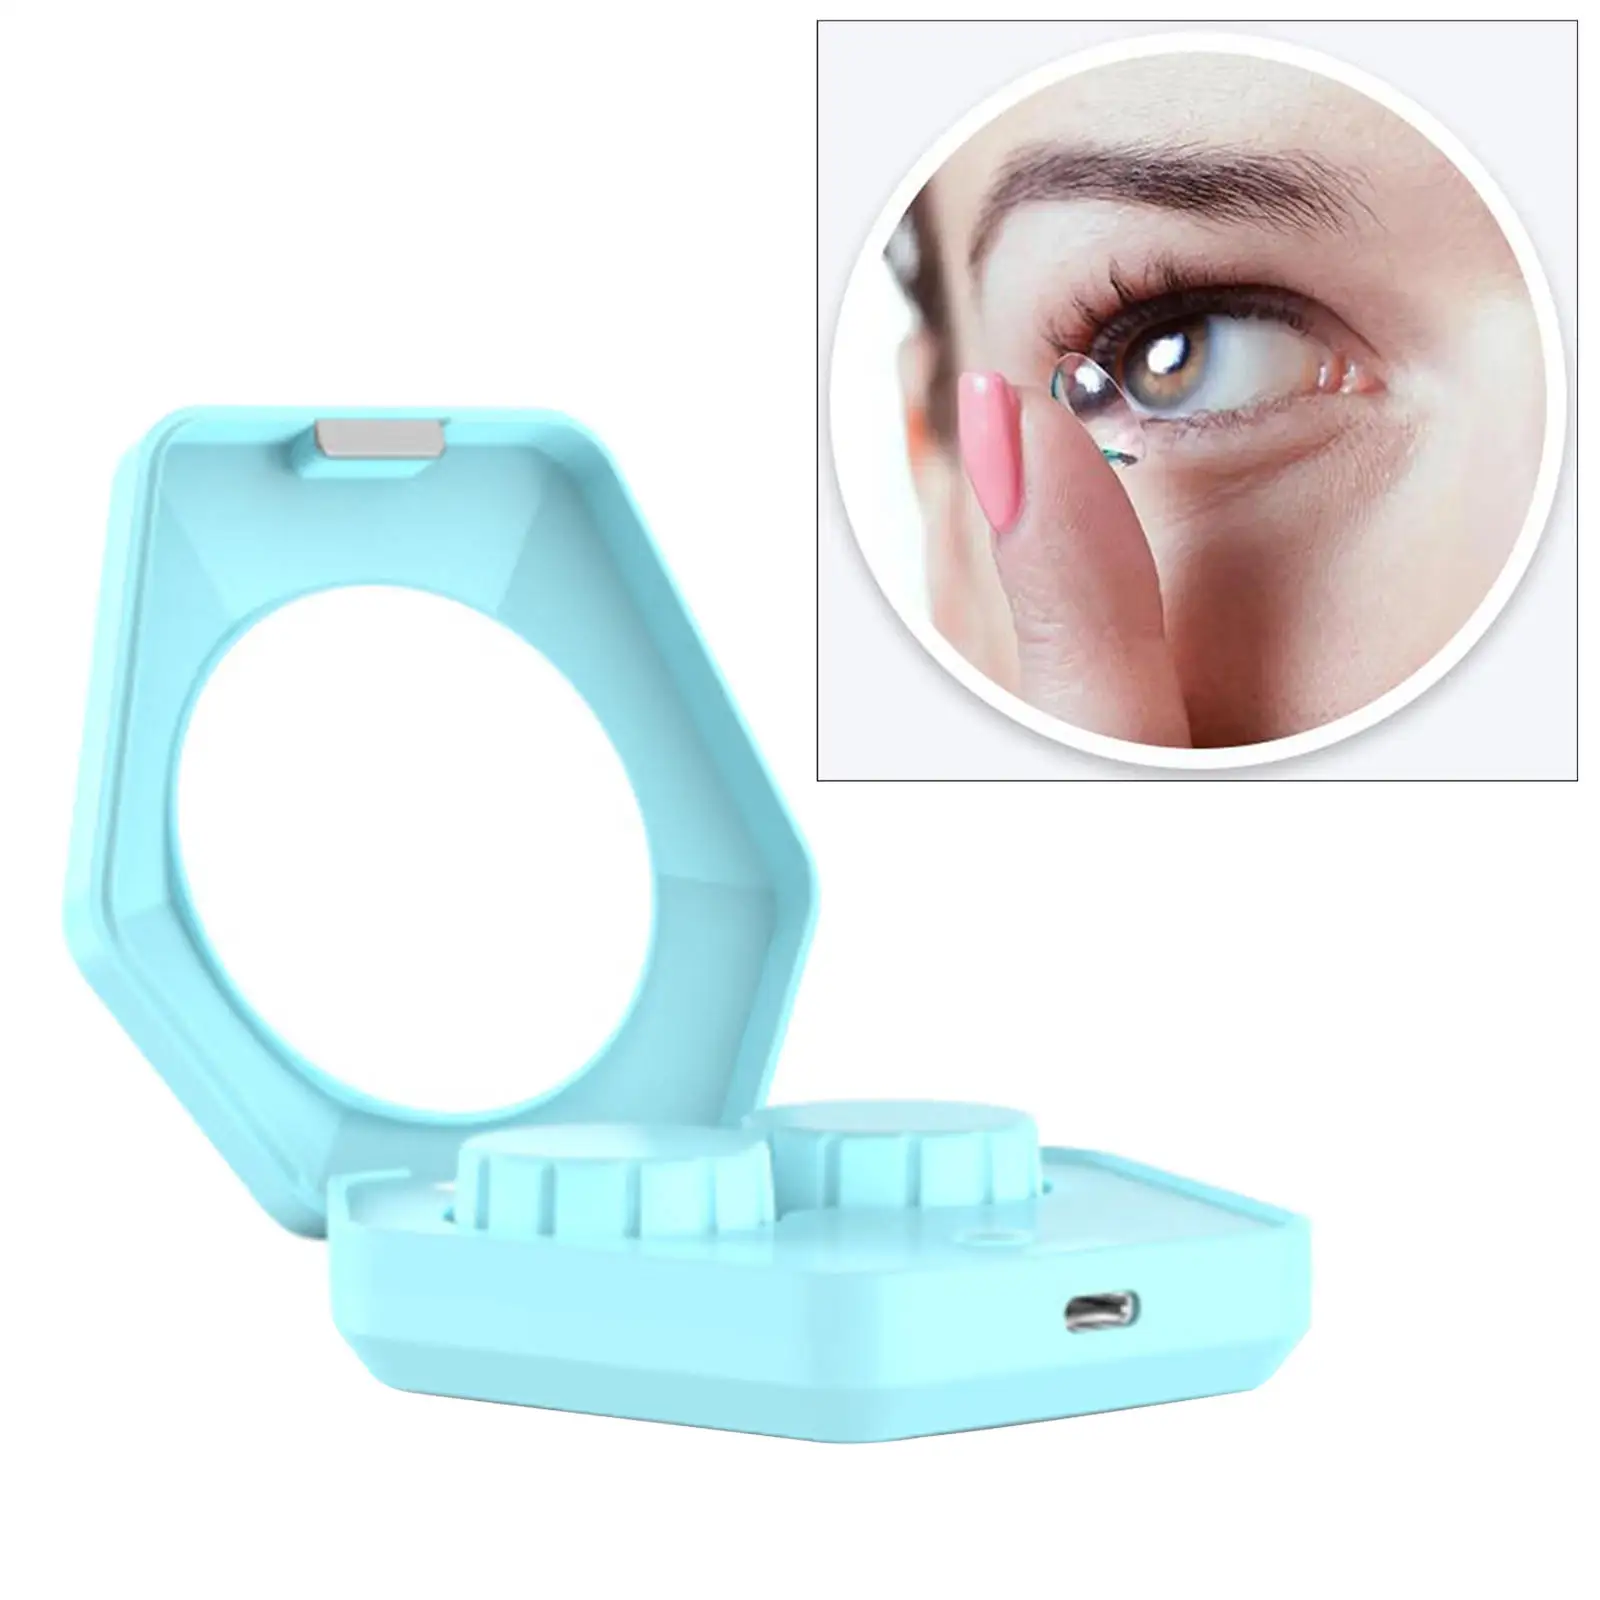 Mute Ultrasonic Contact Lens Cleaner Machine USB Charging Small Auto Cleaning for Disposal Soft Lens Hard Lens Colored Lens